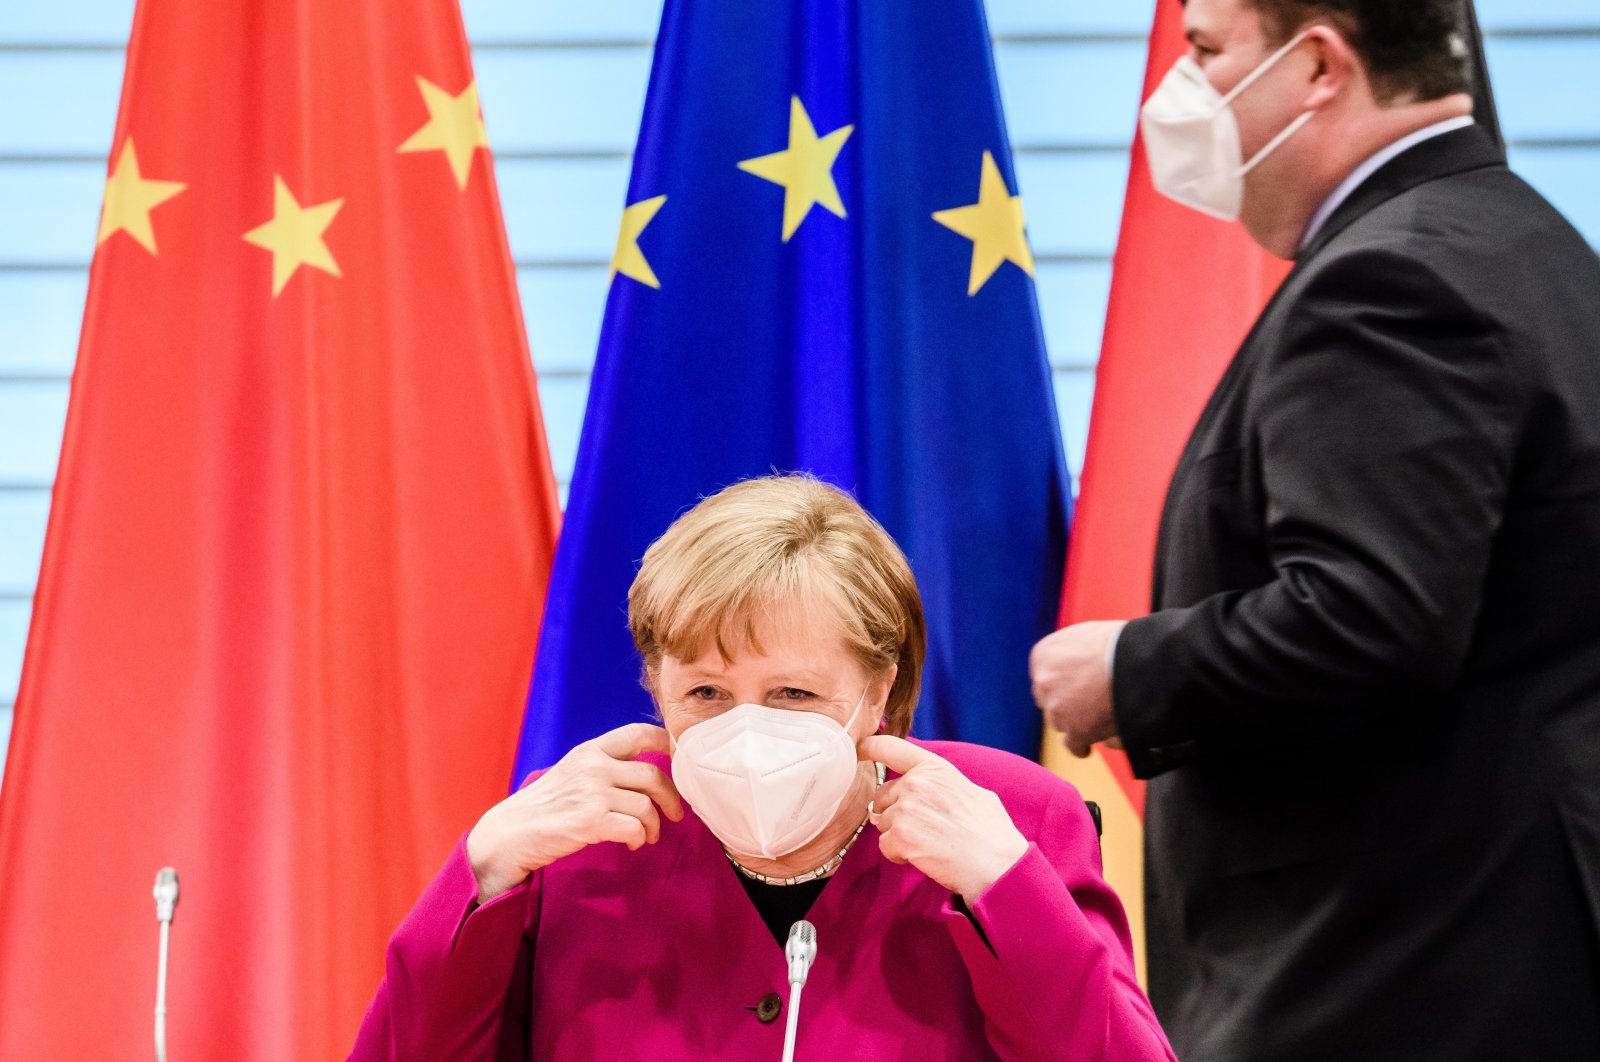 German Chancellor Angela Merkel takes off her face mask as German Minister of Labor and Social Affairs Hubertus Heil (R) passes by during the beginning of a virtual plenary session of the 6th German-Chinese government consultations in Berlin, Germany, April 28, 2021. (EPA Photo)